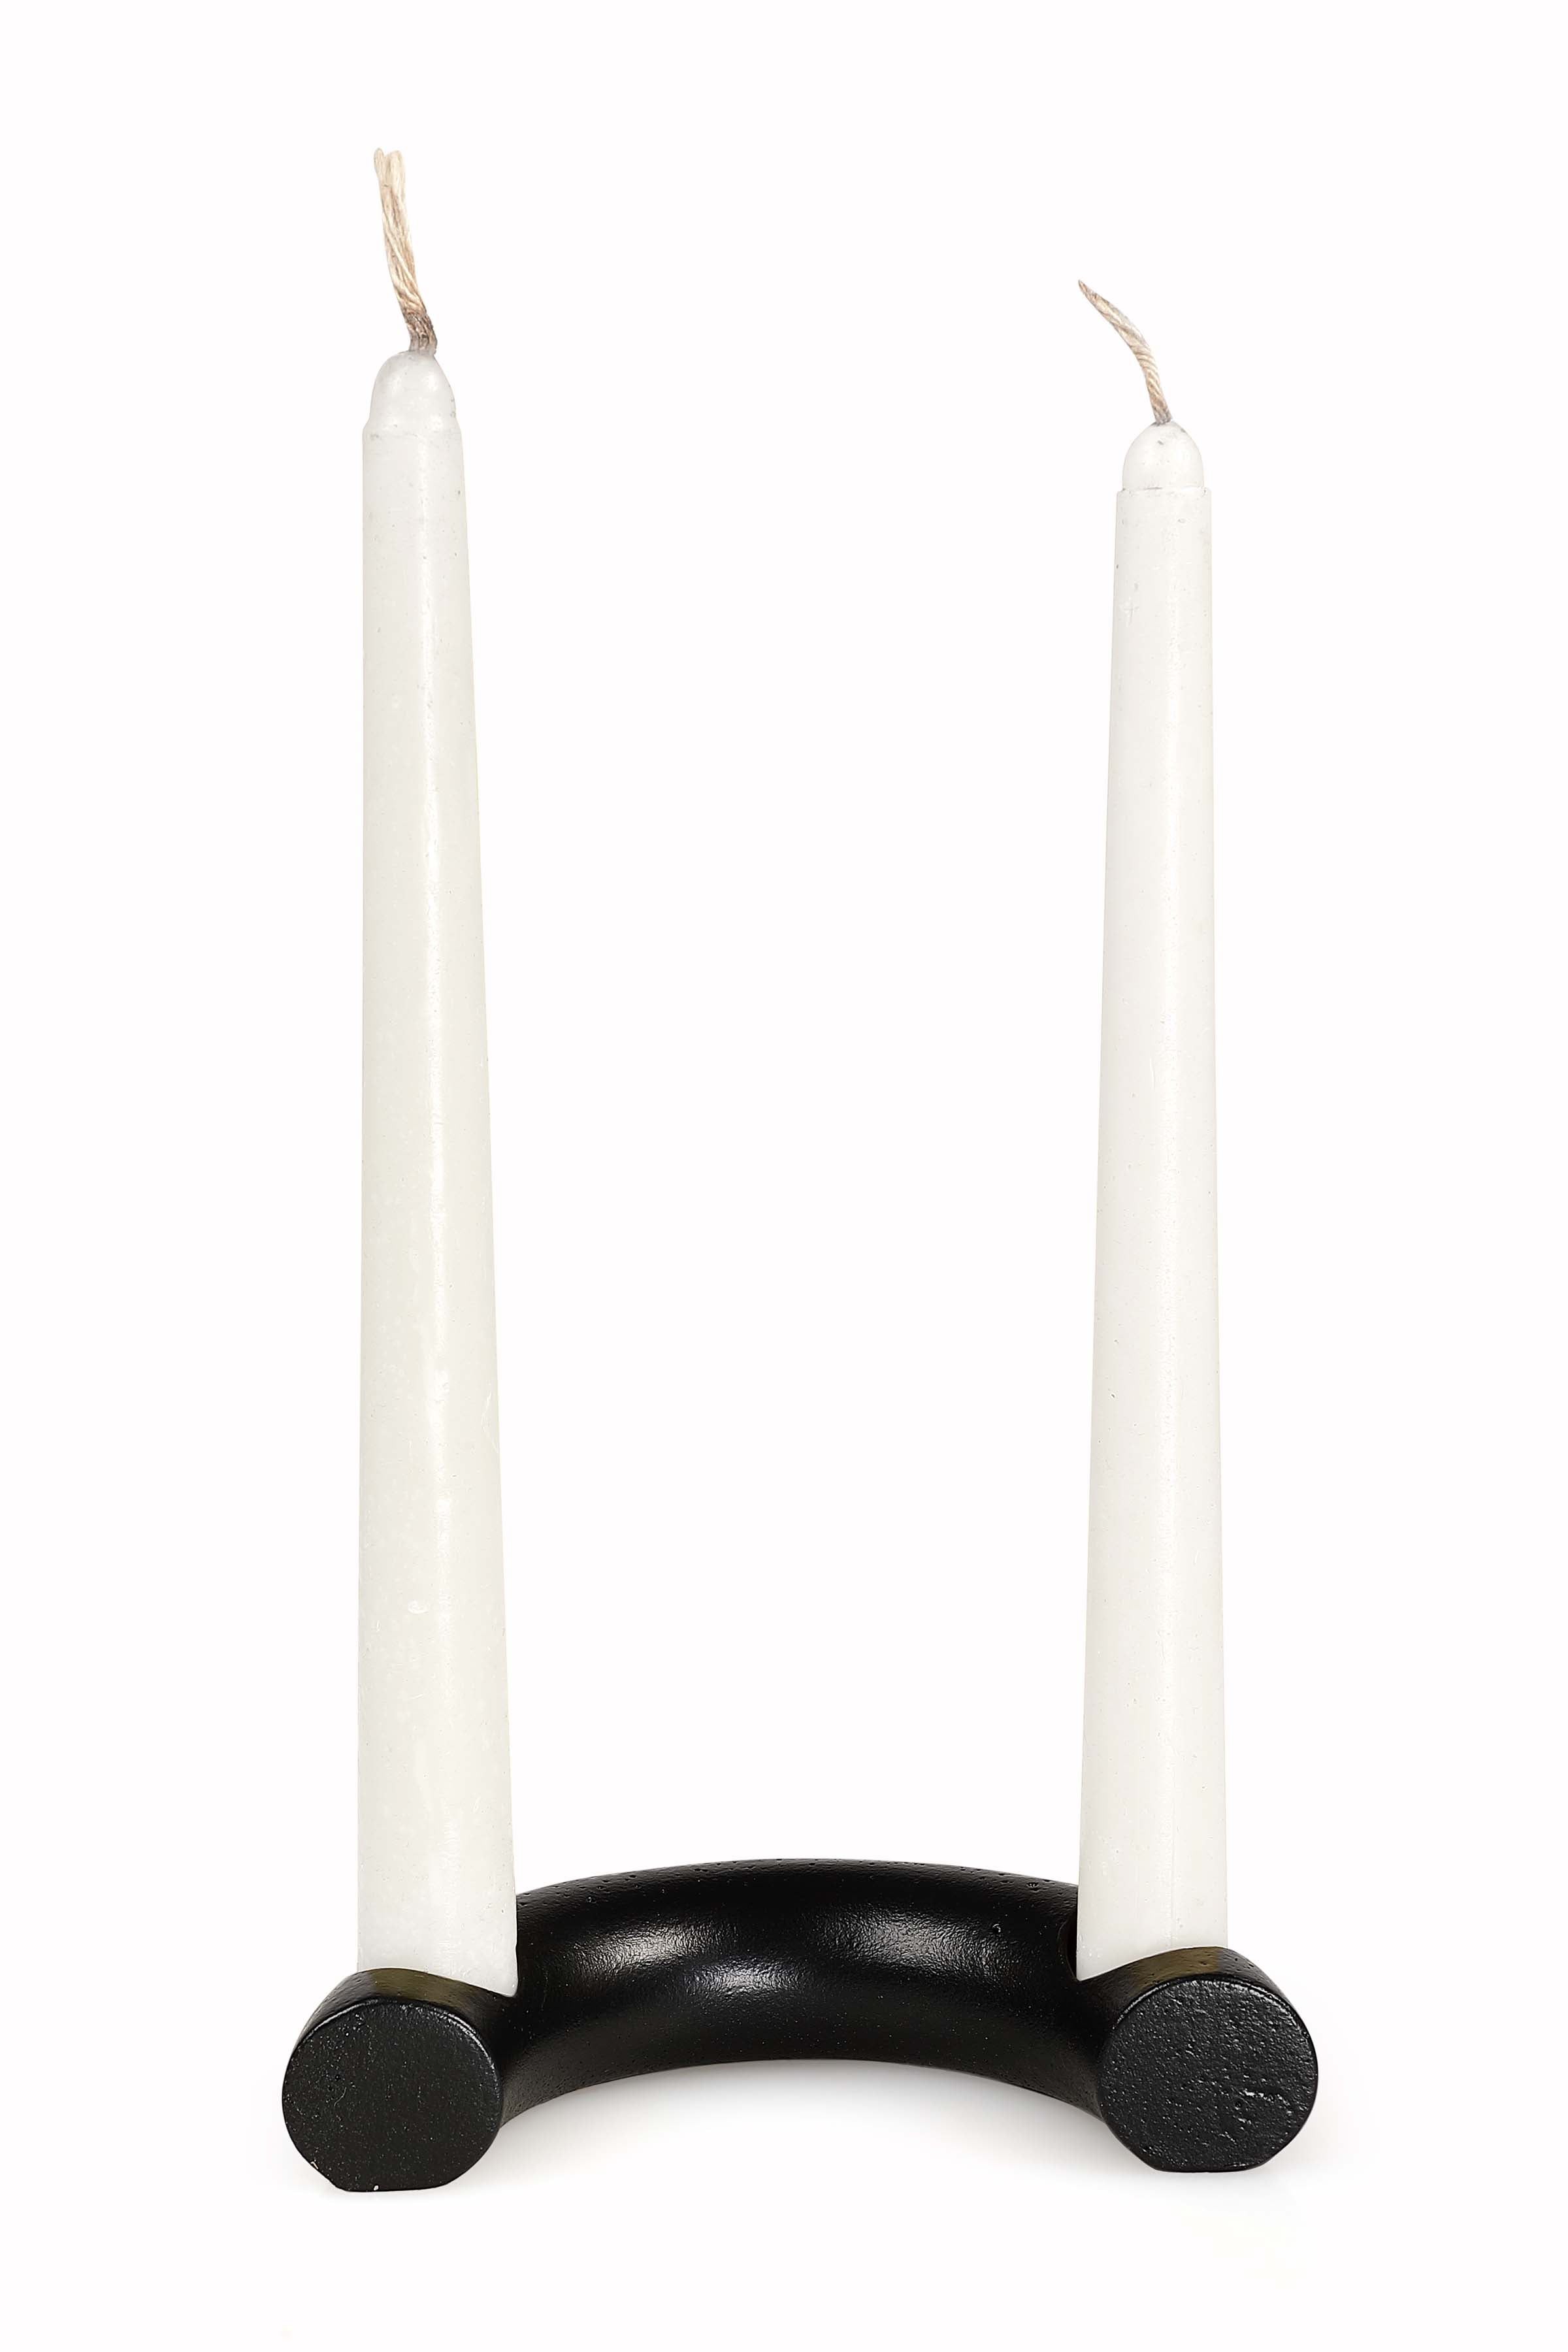 Nordic Style C Shaped Concrete Candle holder-  Black 5.5x3 Inch (Set of 2)